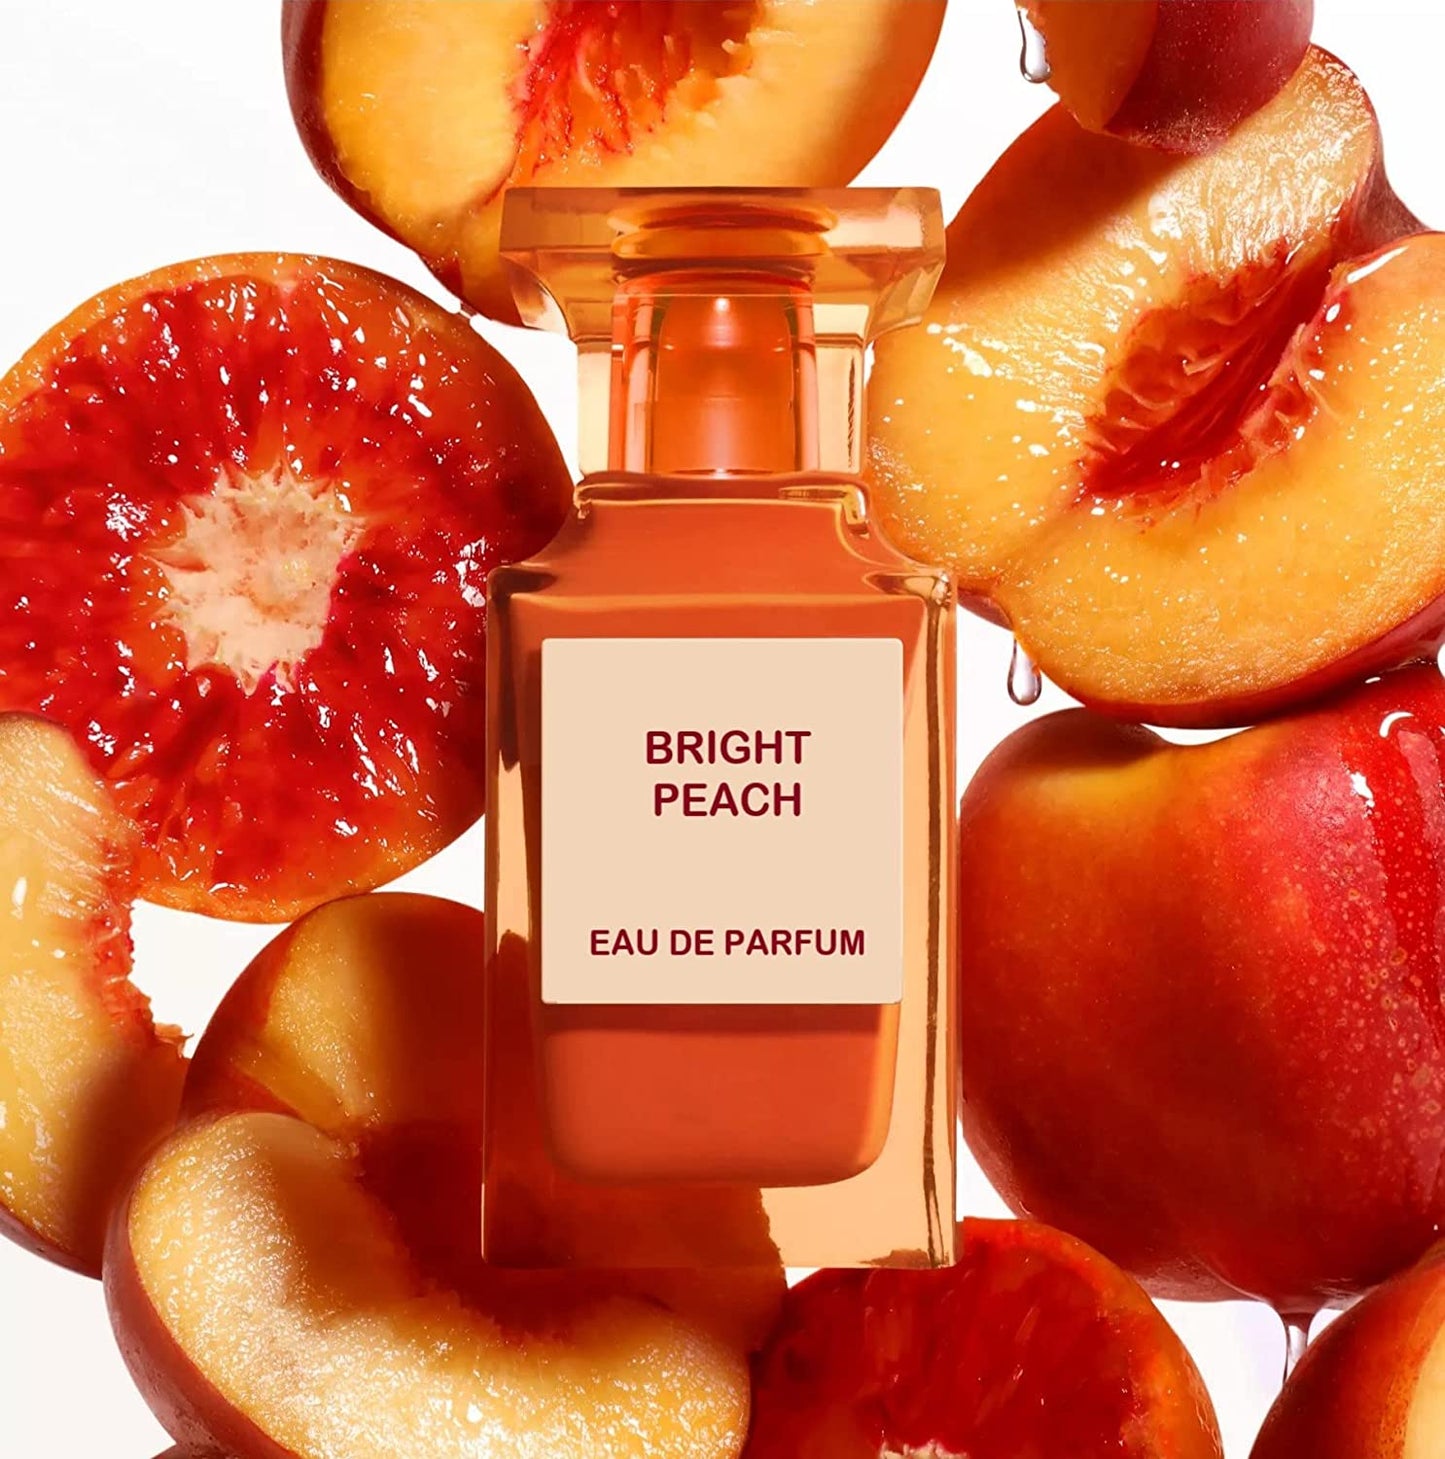 Bright Peach 80ml | Eau De Parfum | Perfume For Women & Men By Maison Alhambra (Inspired By Bitter Peach By Tom Ford)